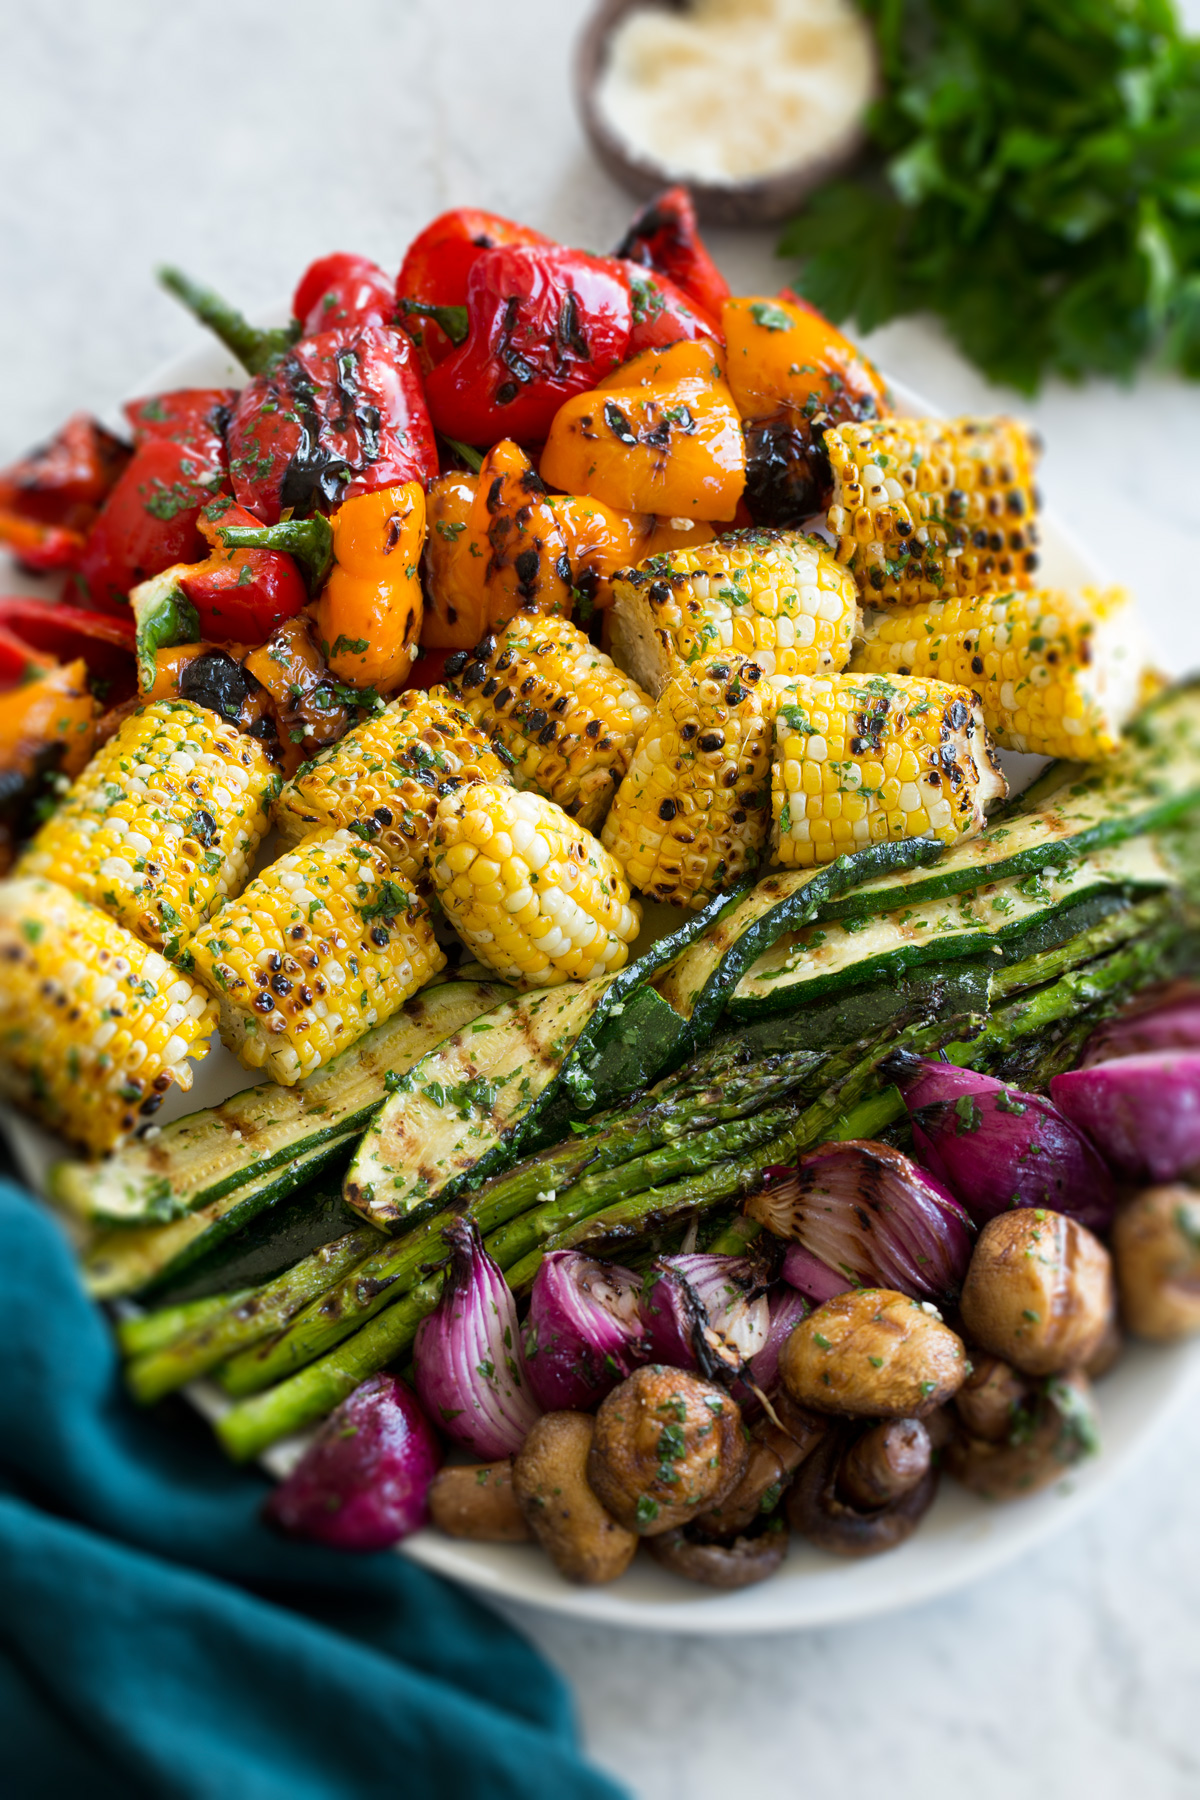 Grilled vegetables shown on an oval platter from a side angle with a blue cloth to the side.